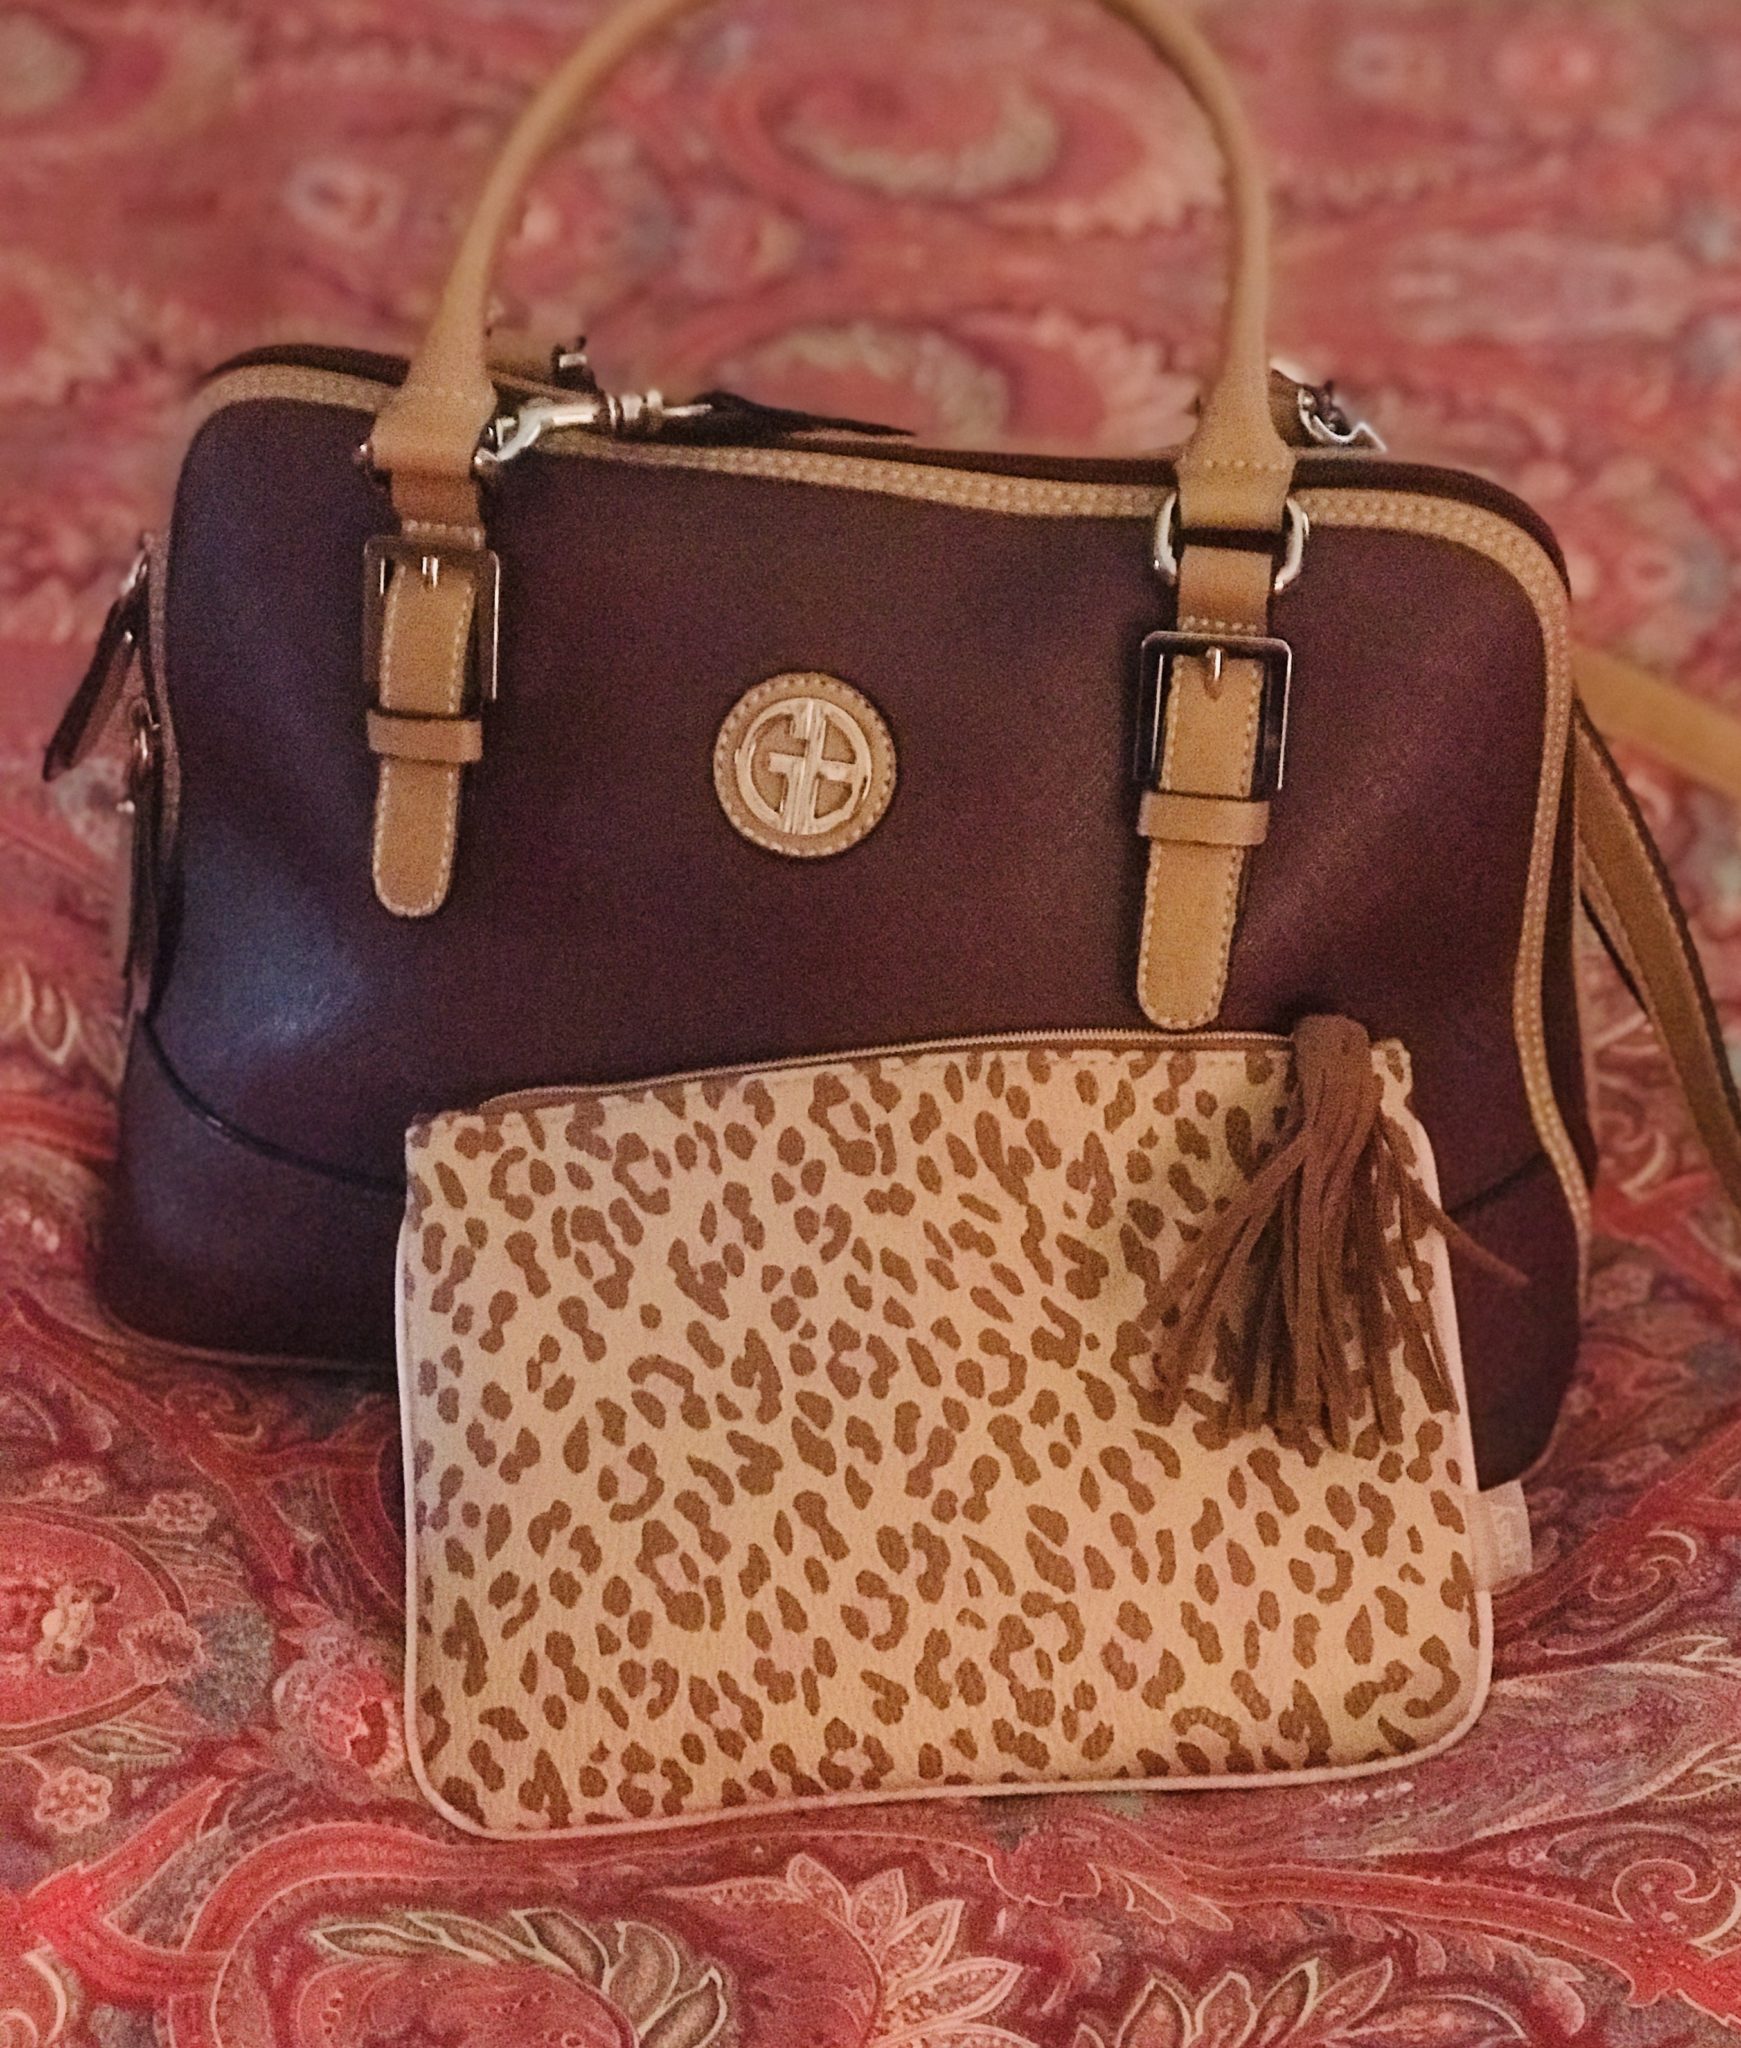 leopard print makeup bag with faux suede tassel with my purple purse with caramel trim that matches the makeup bag